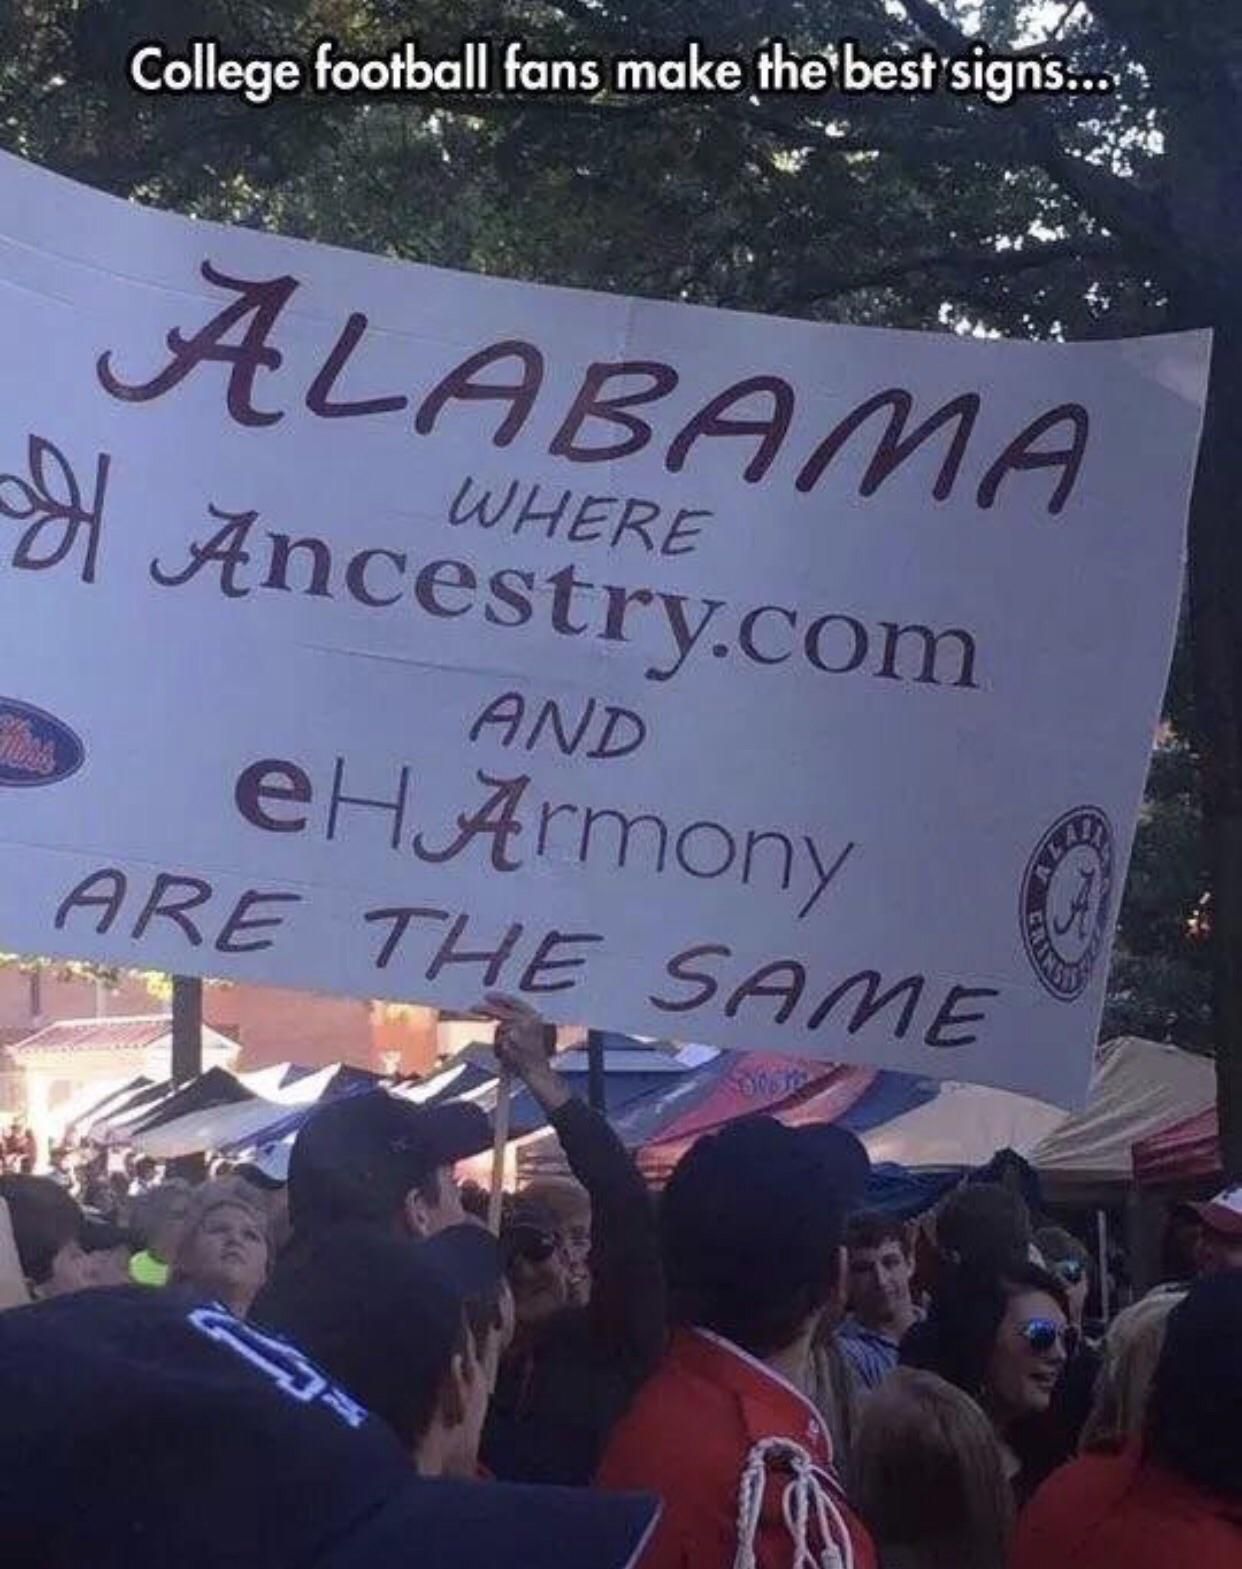 College football fans make the best signs.